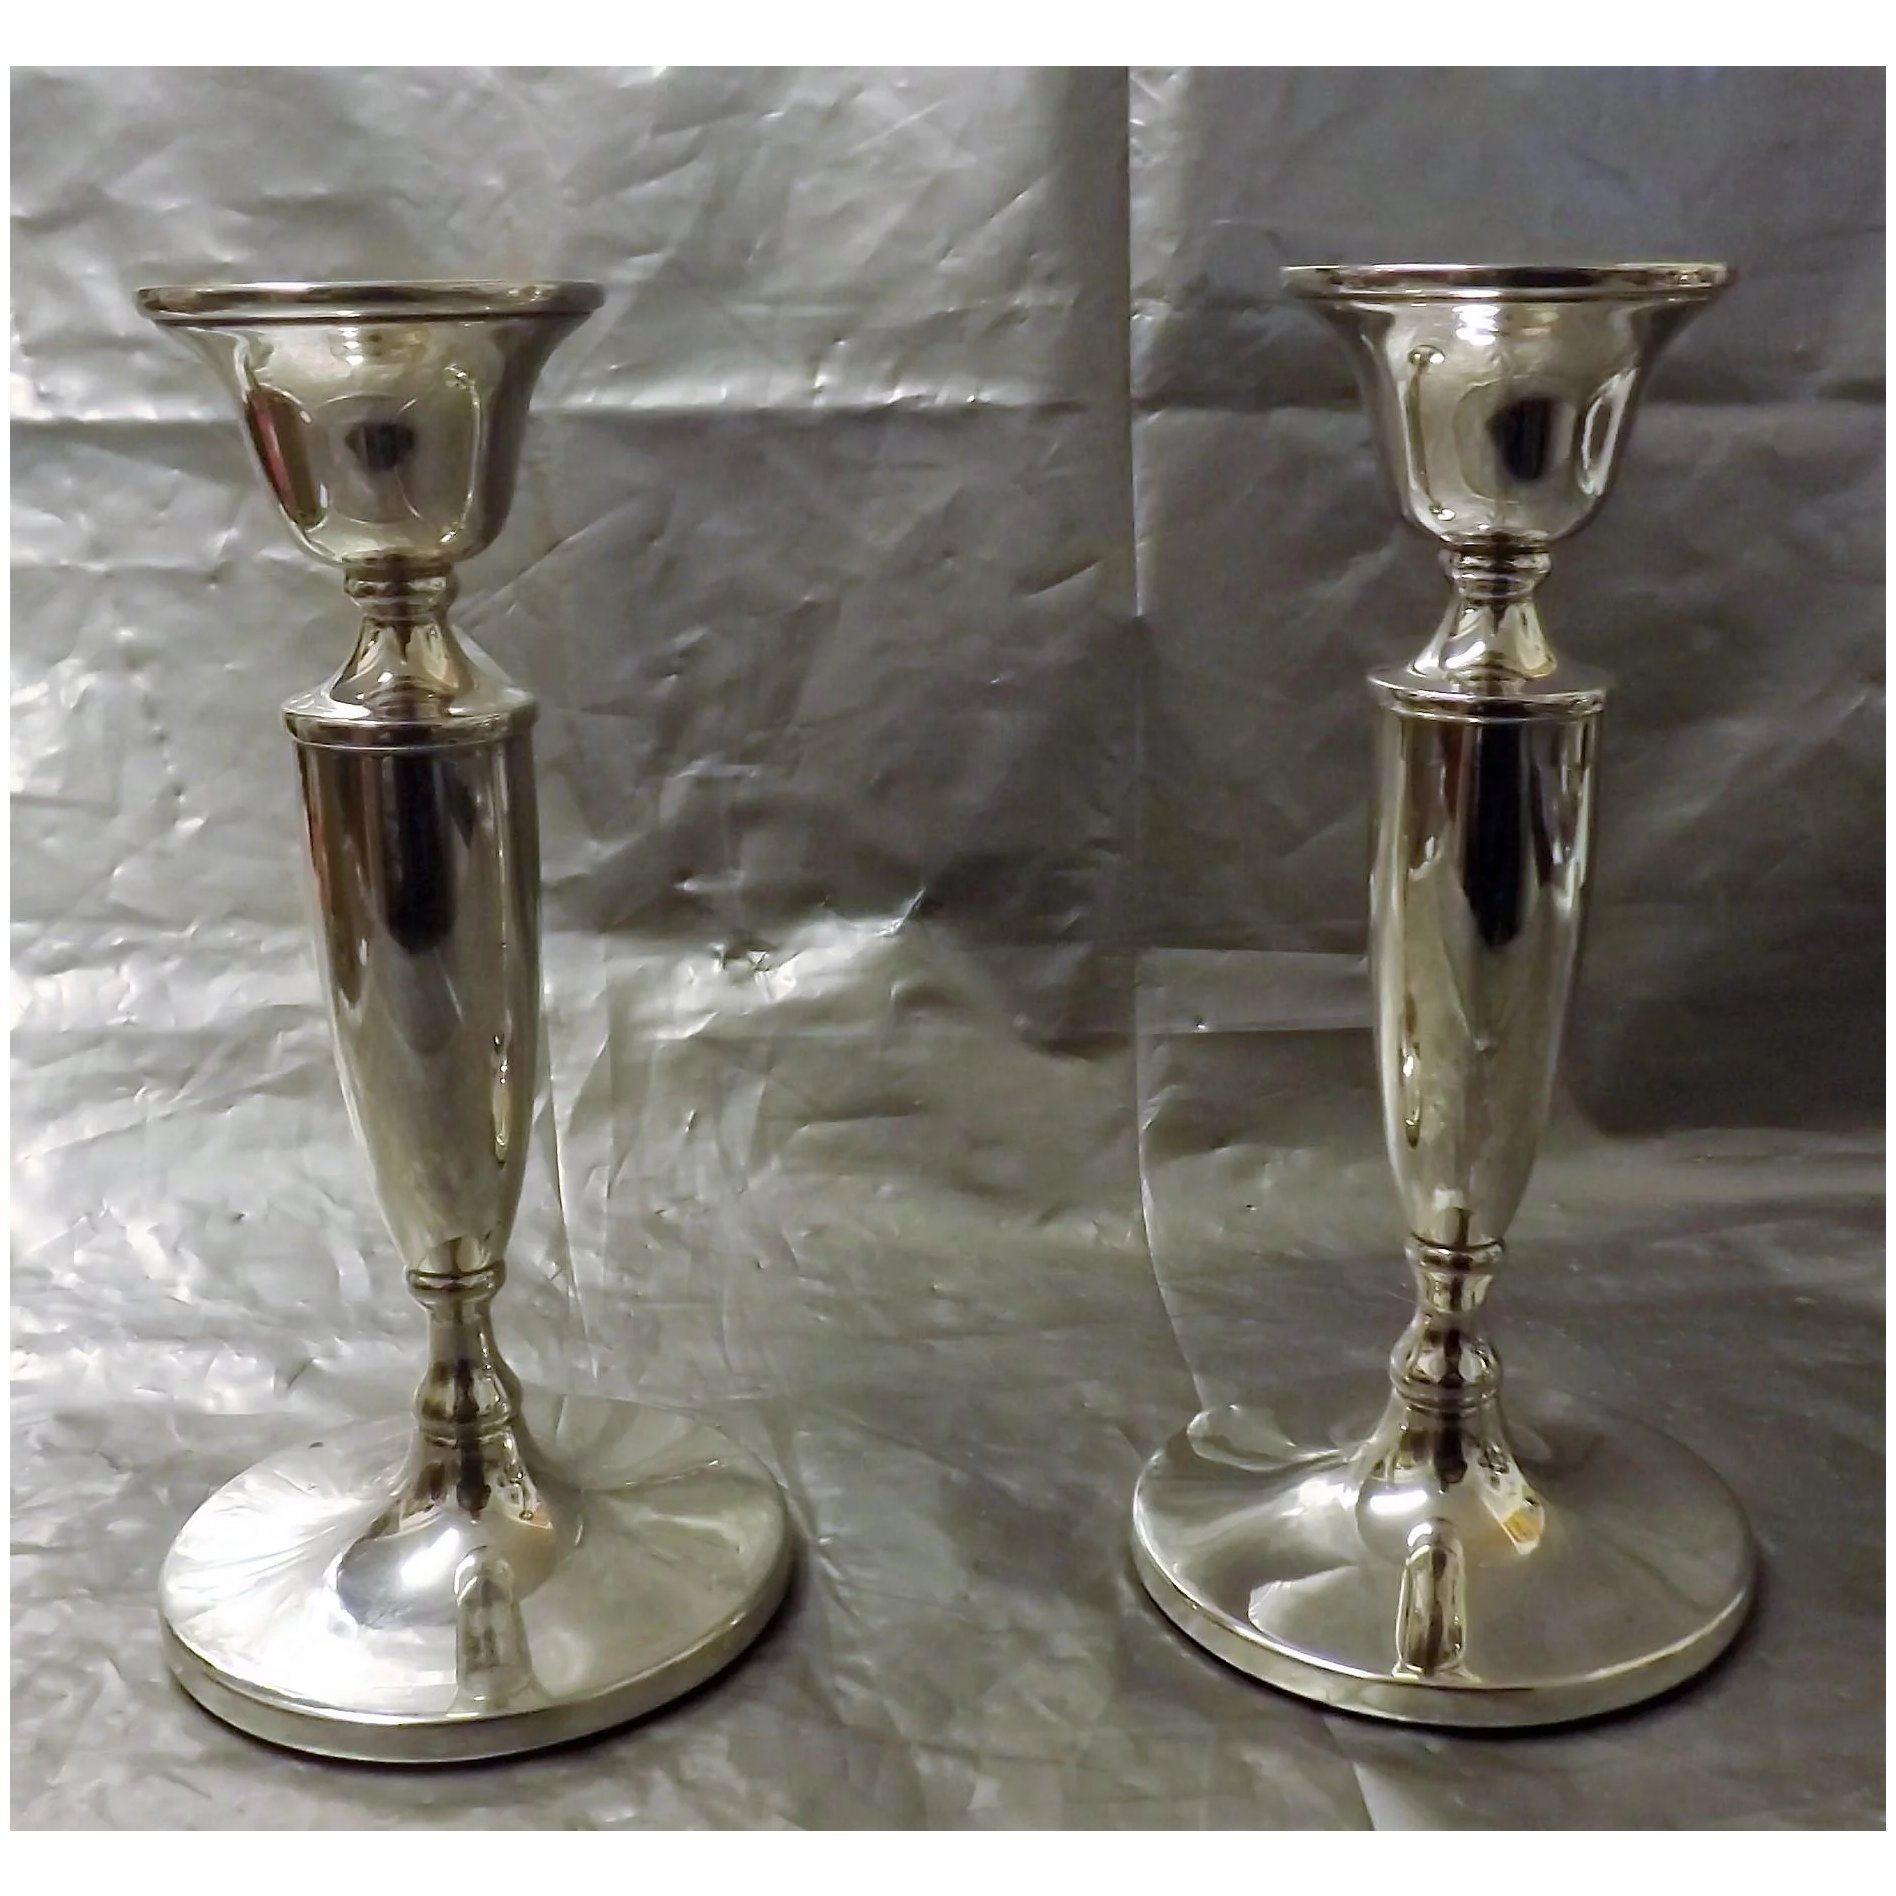 A Pair of Sterling Silver Georgian Revival Candlesticks